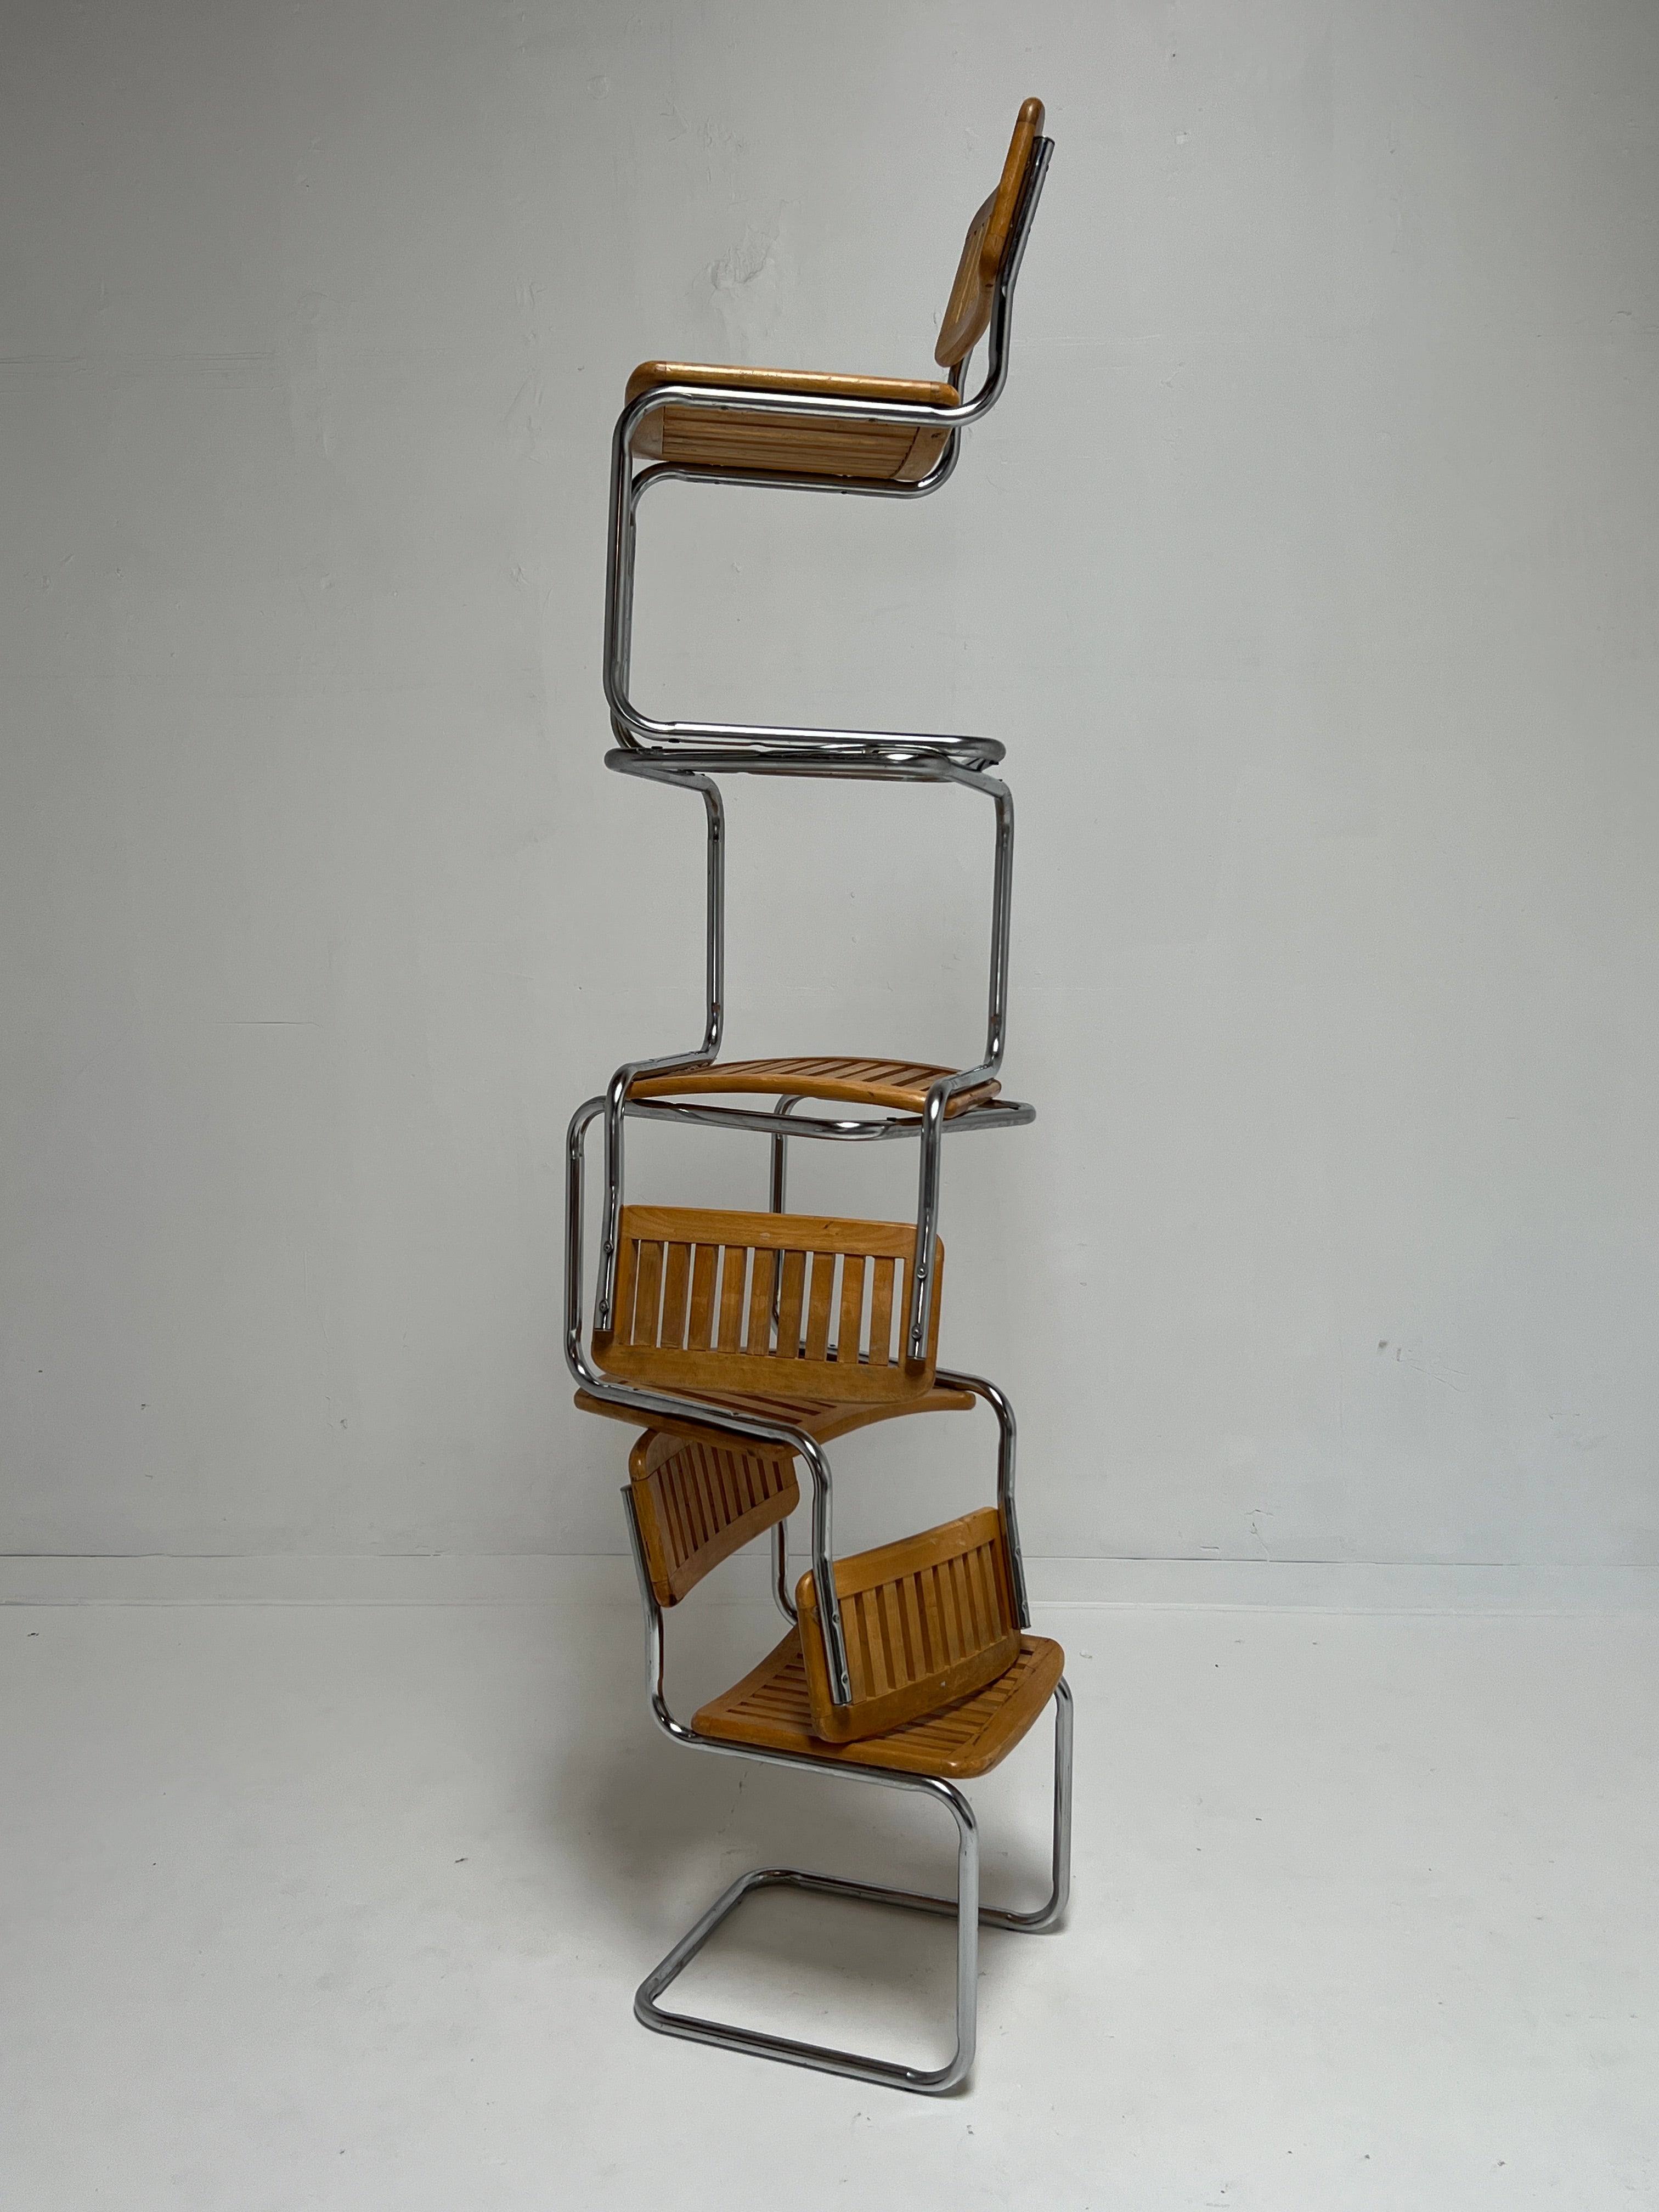 Slatted Cesca Style Cantilever Chairs